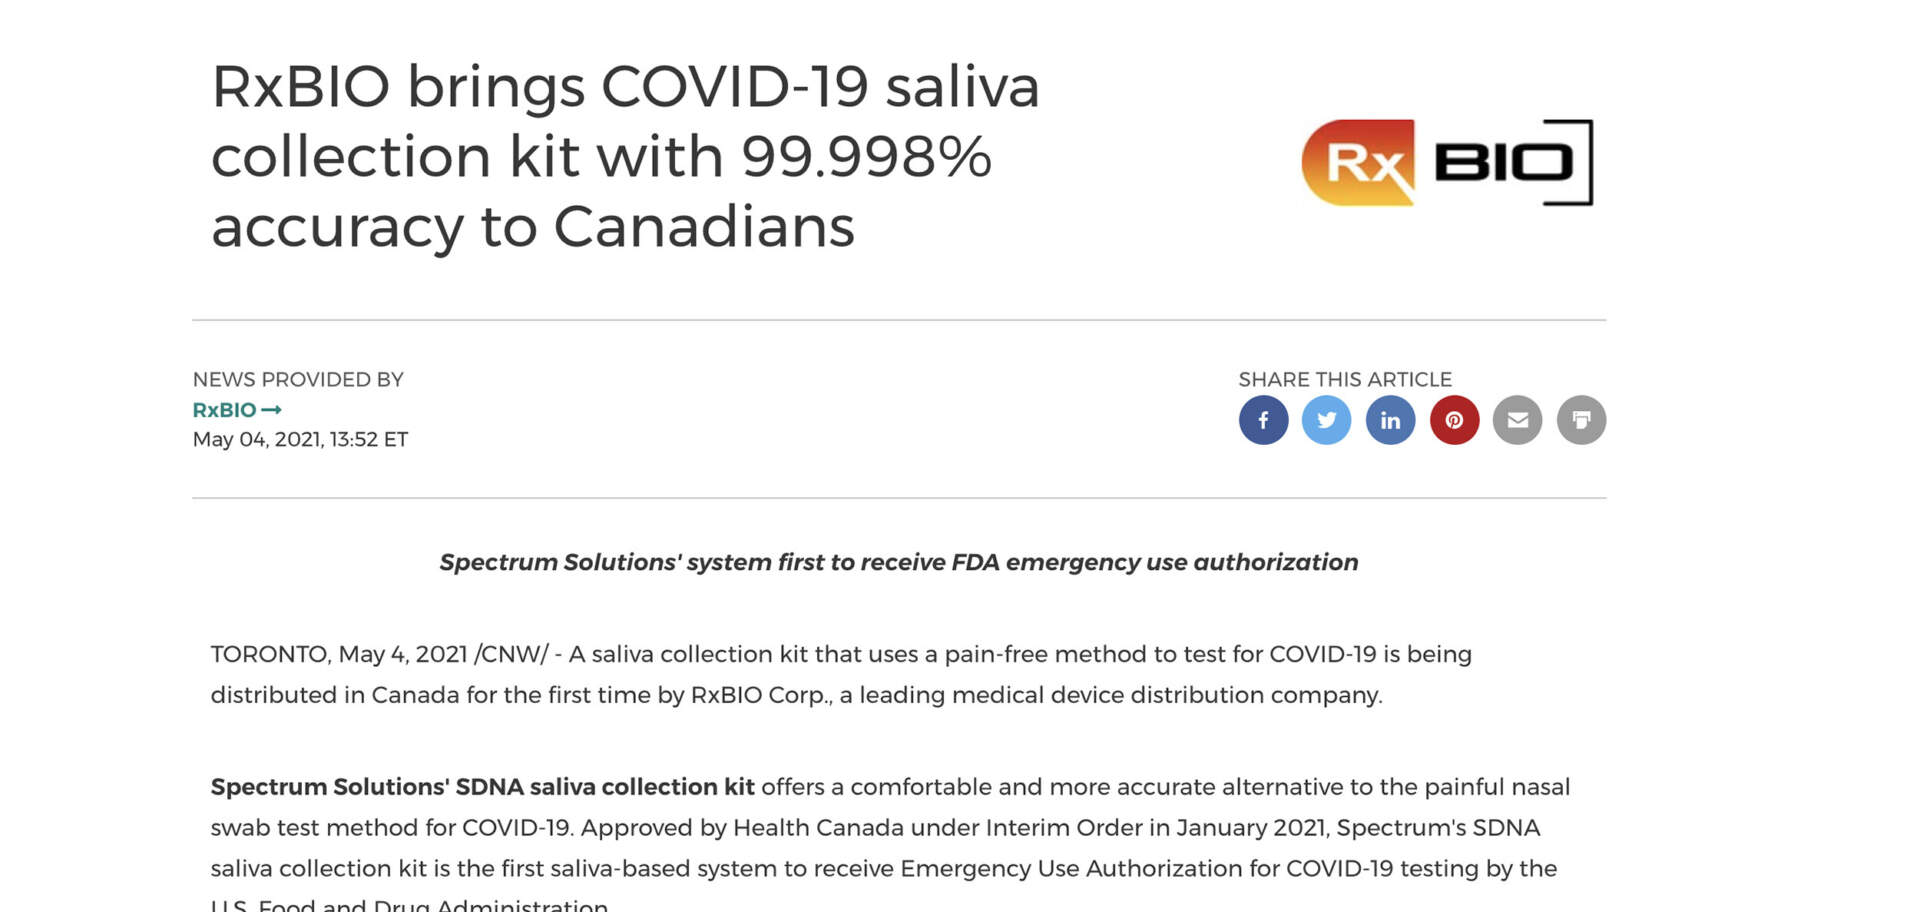 RXBIO BRINGS SPECTRUM SOLUTION SALIVA COLLECTION SYSTEM FOR COVID TESTING TO CANADA